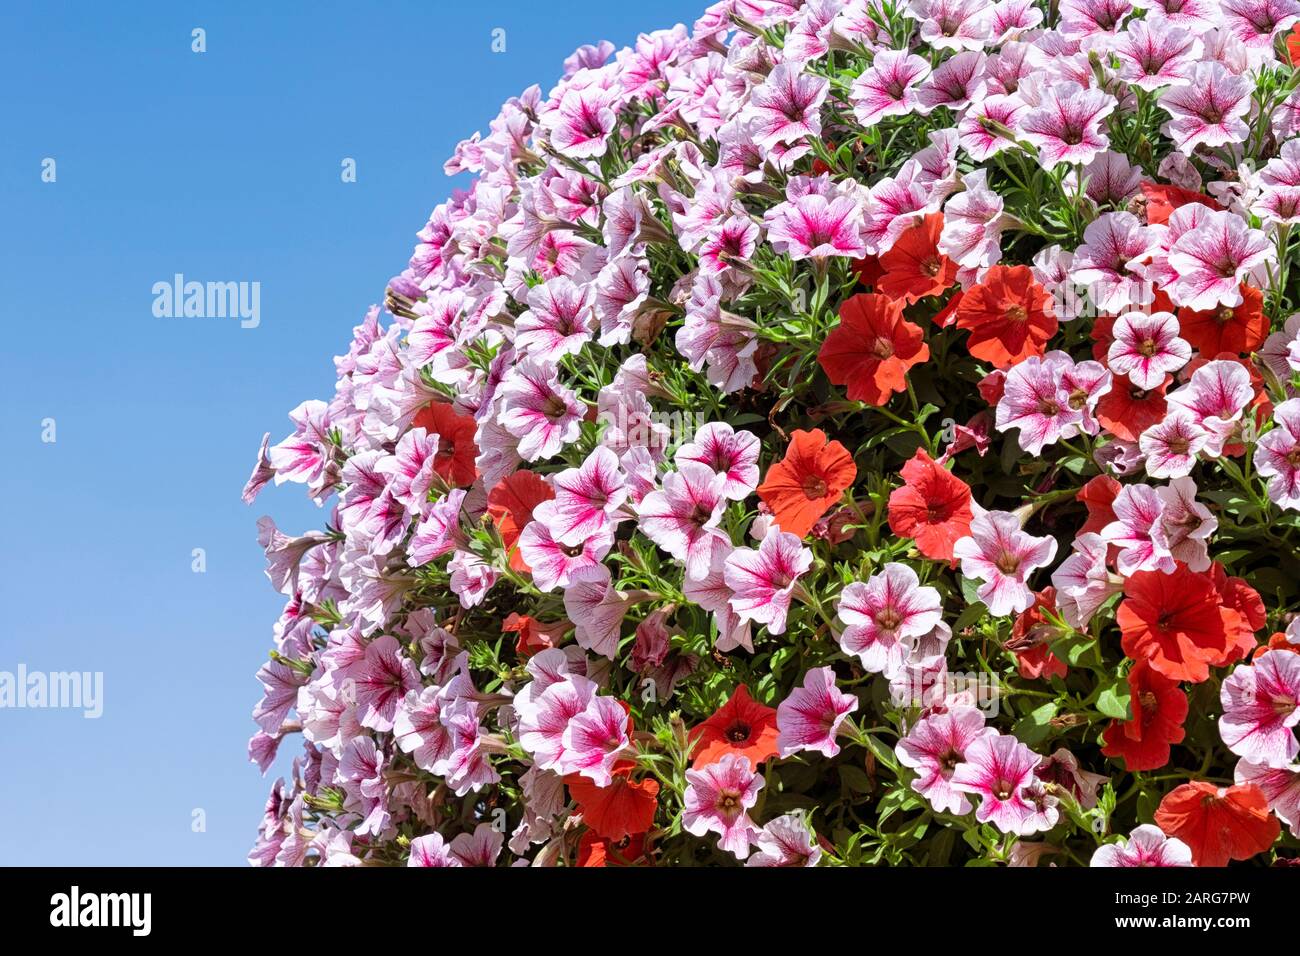 Mounds of blossoming flowers on a summer day Stock Photo